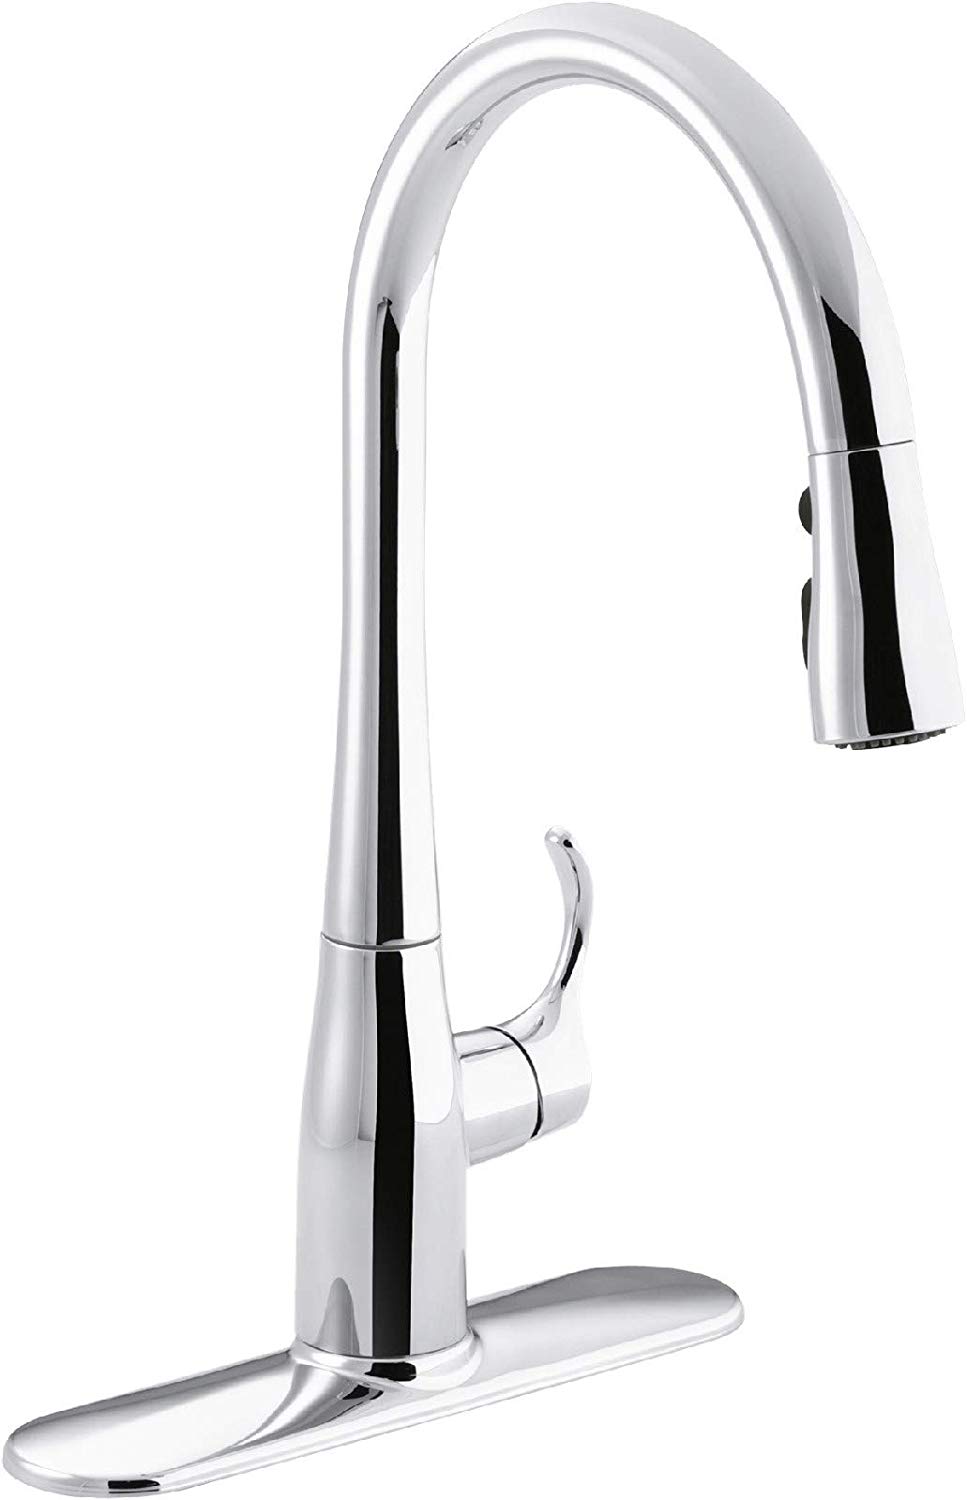 3 hole kitchen faucet with pull down sprayer